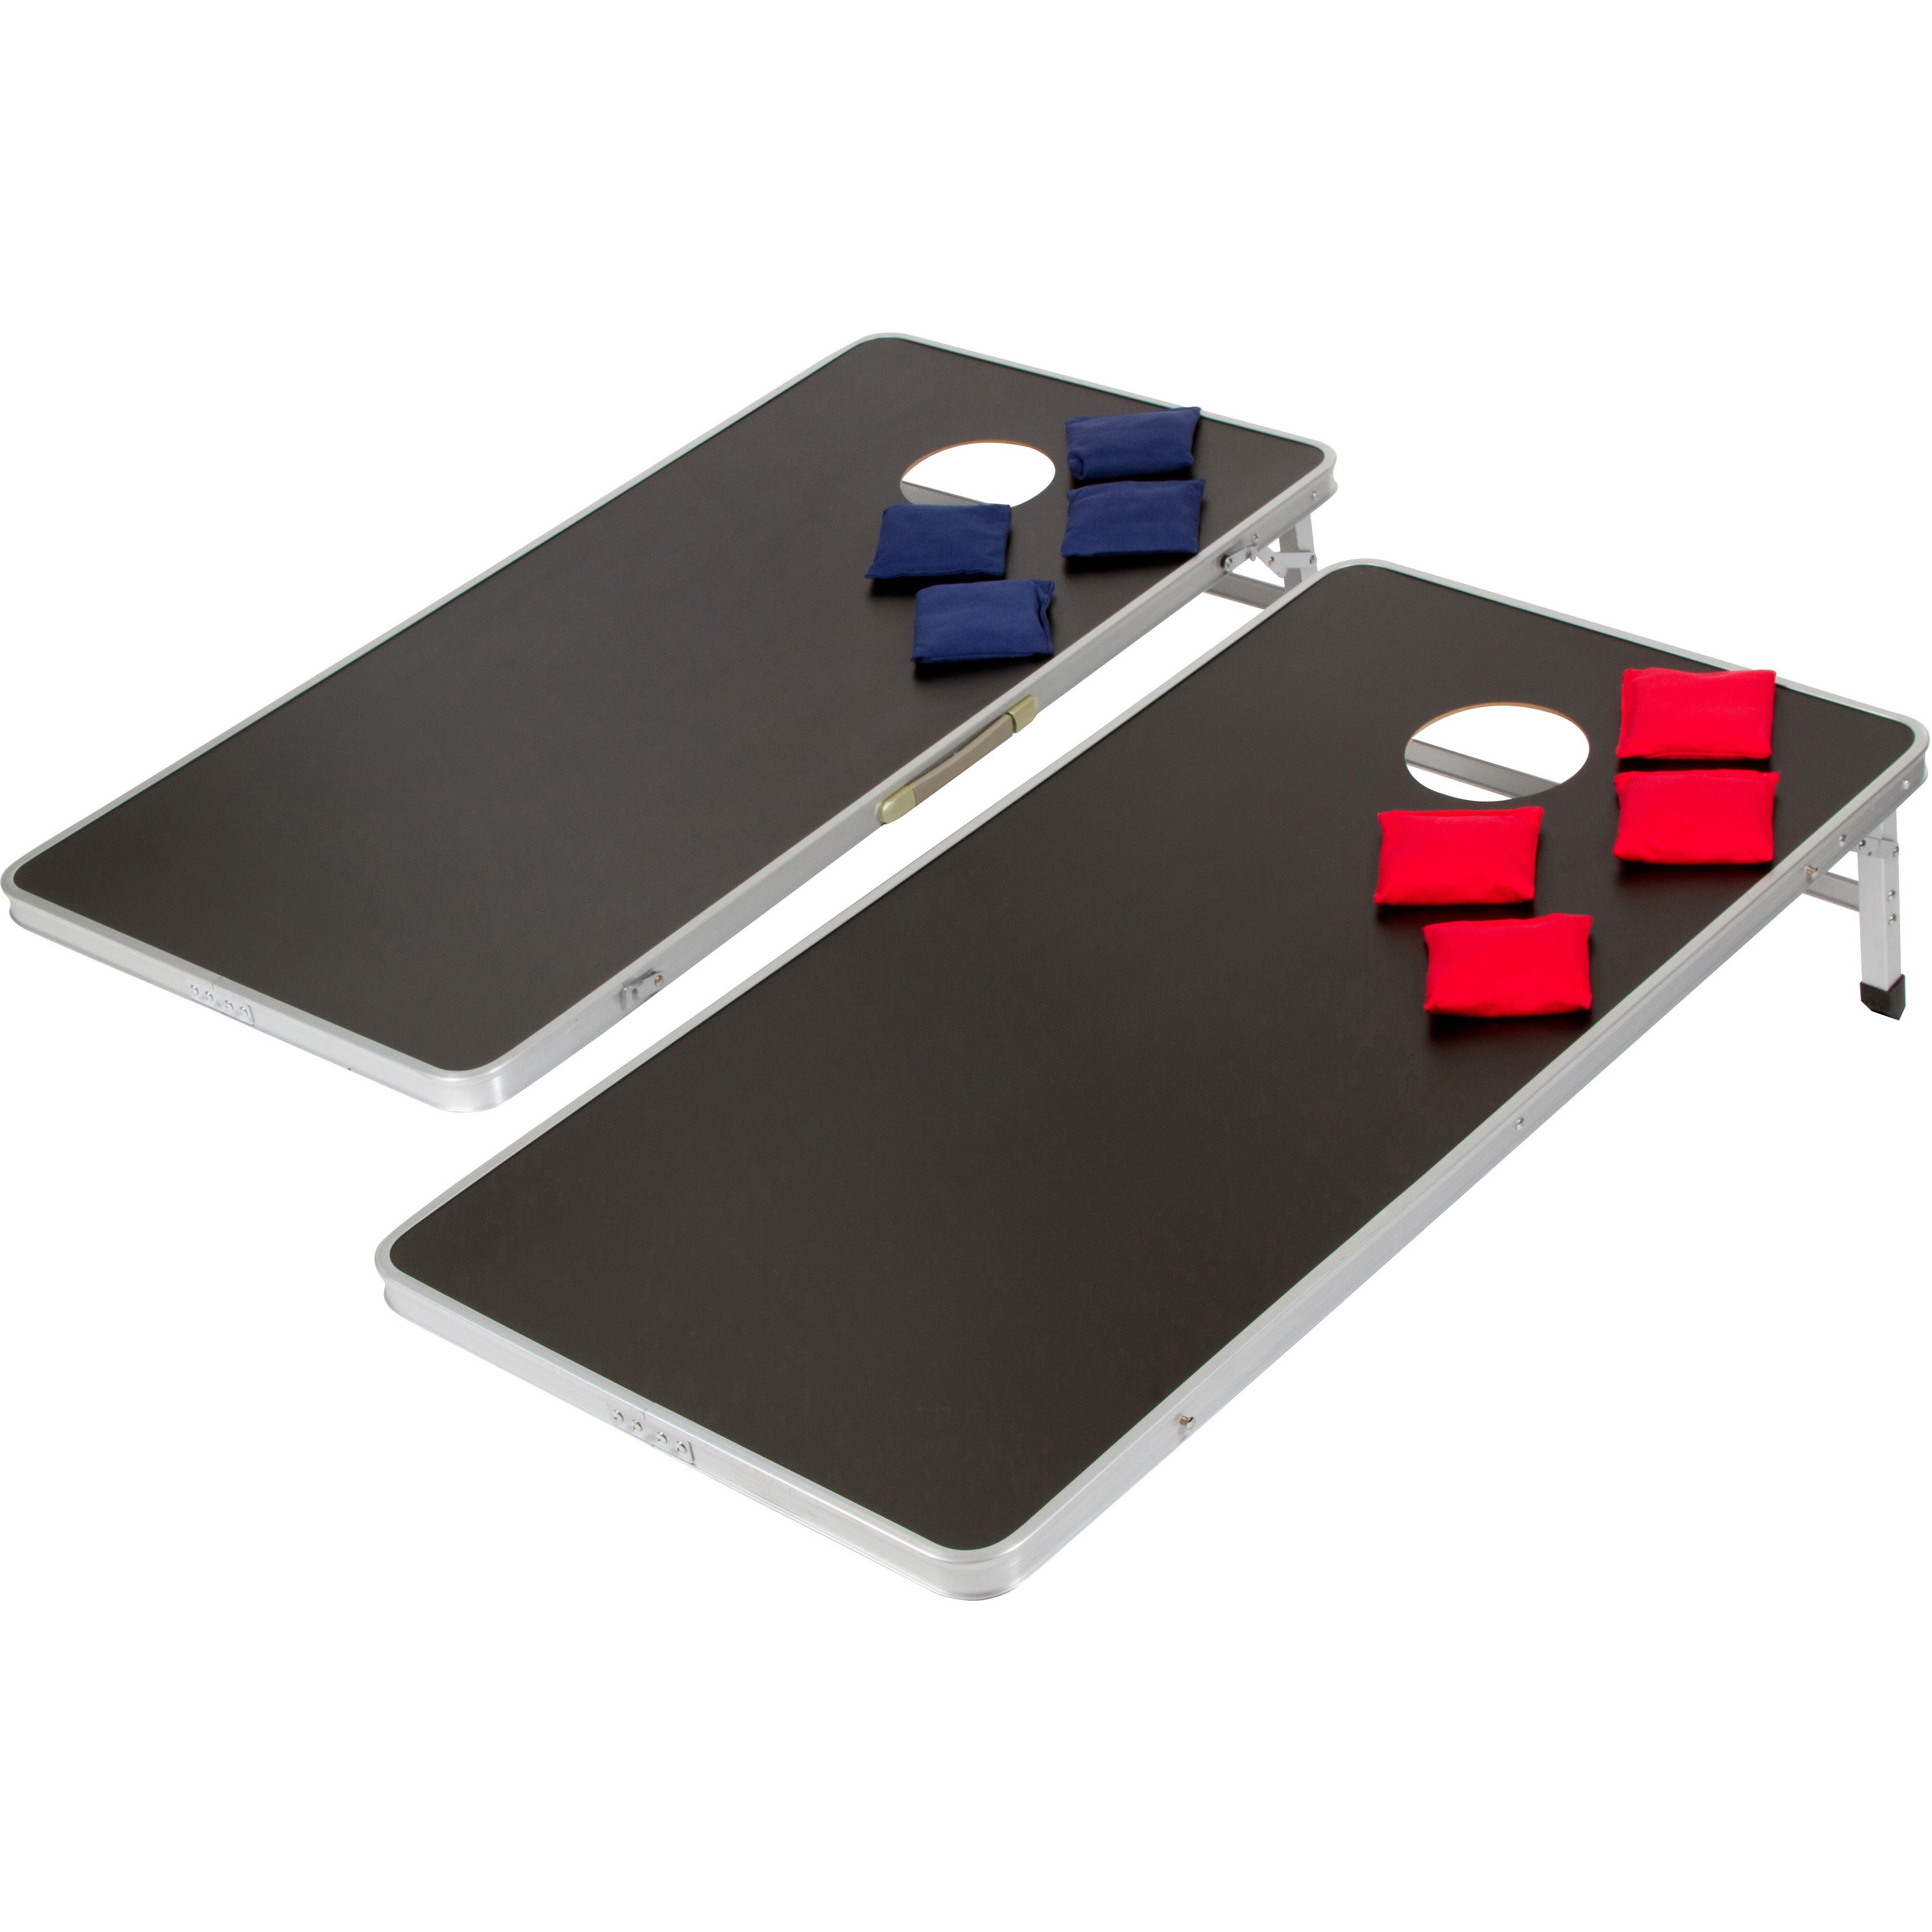 Portable Regulation Size Bean Bag and Corn Hole Toss Set, Lightweight and Portable Aluminum - image 2 of 2